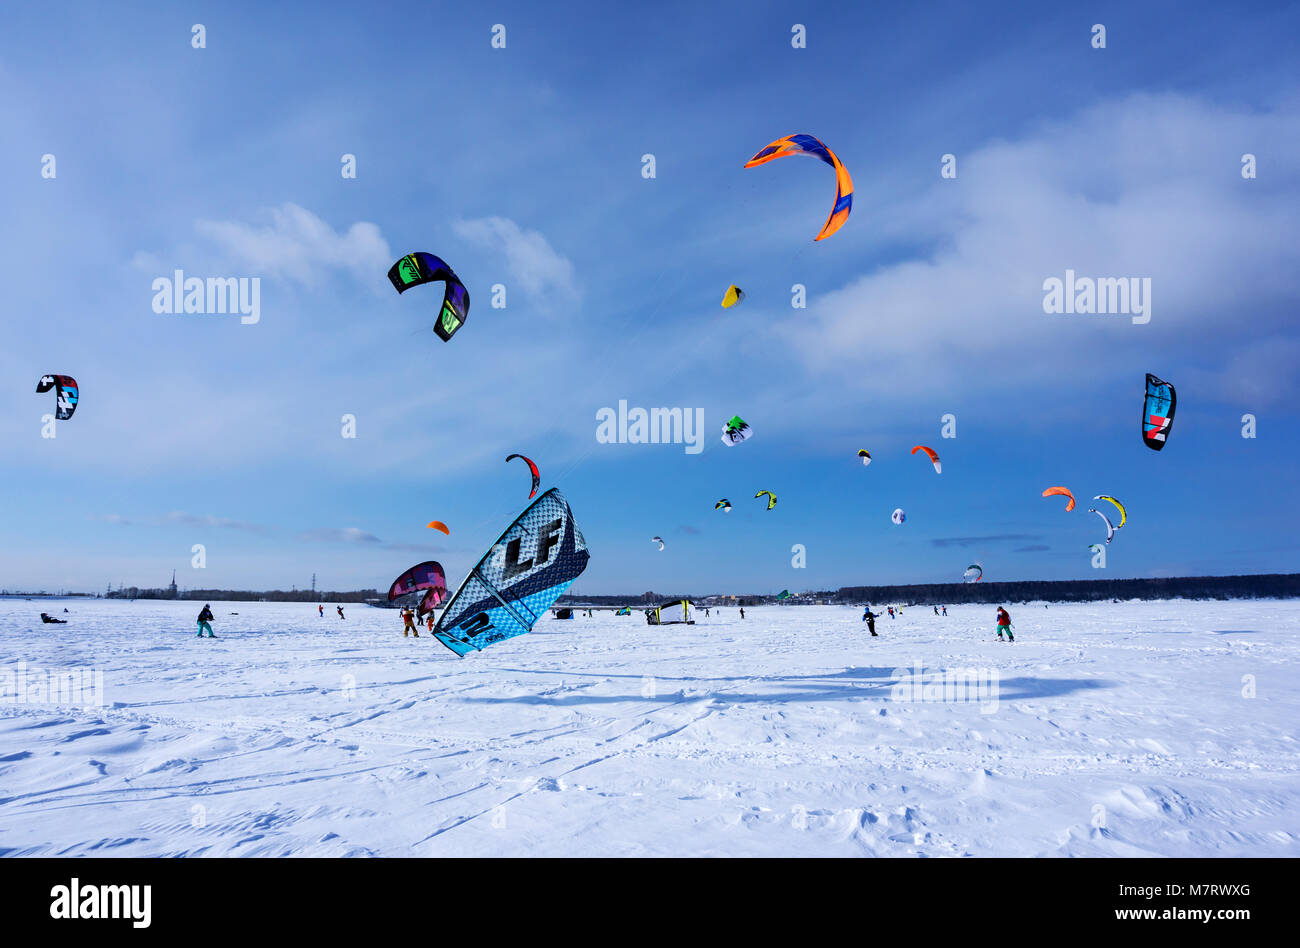 PERM, RUSSIA - MARCH 09, 2018: snow kiters rides on the ice of a frozen river Stock Photo